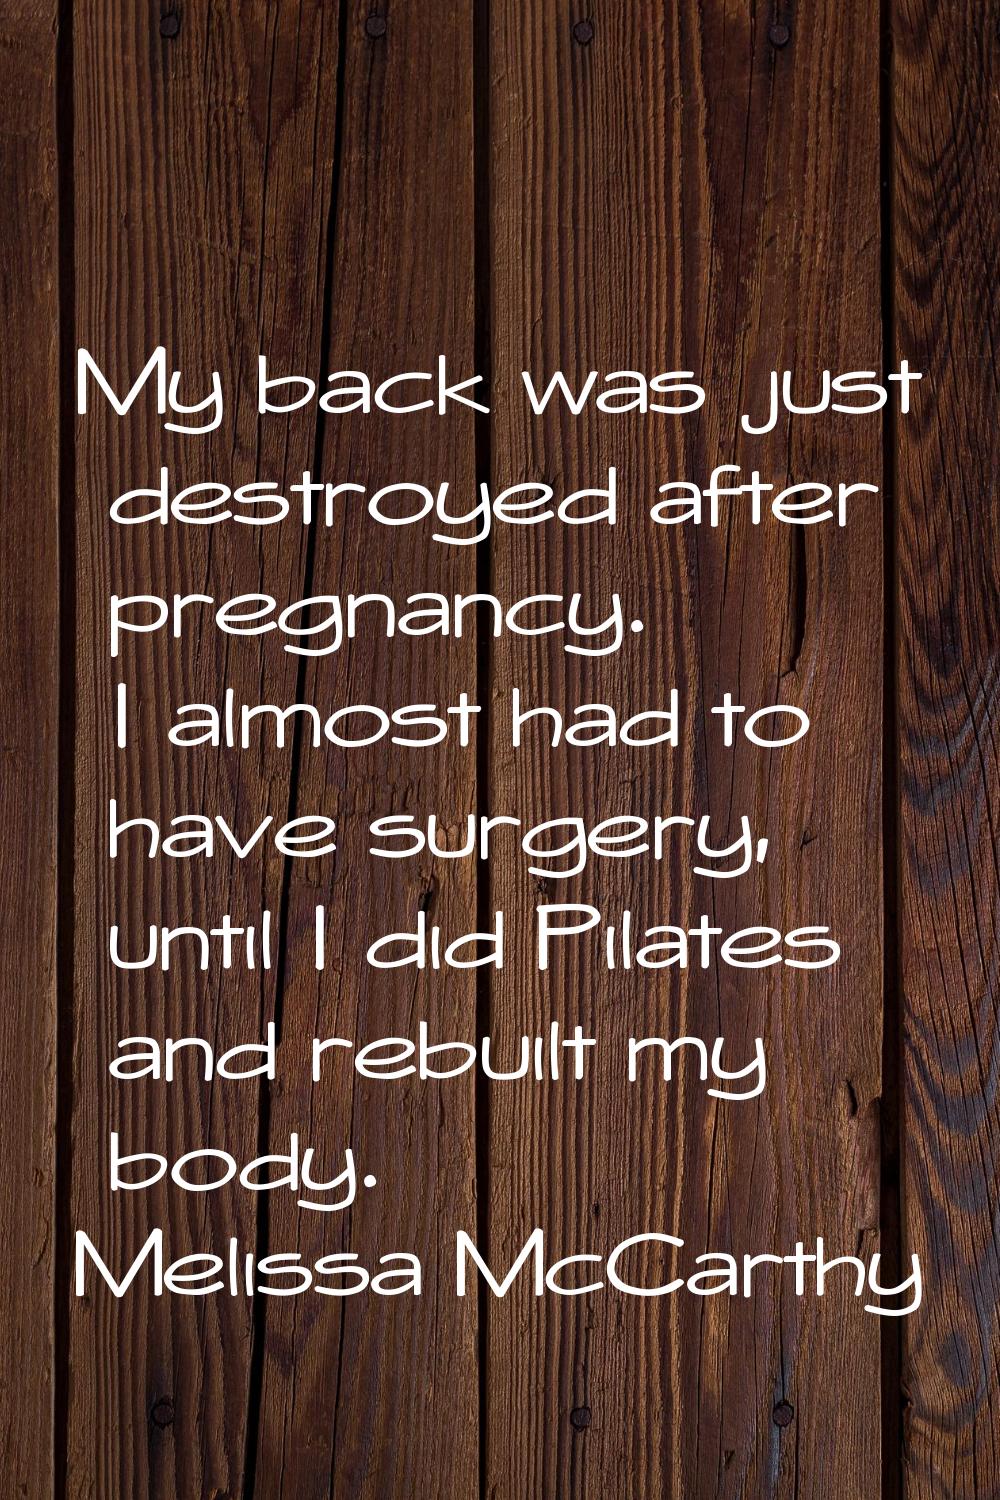 My back was just destroyed after pregnancy. I almost had to have surgery, until I did Pilates and r